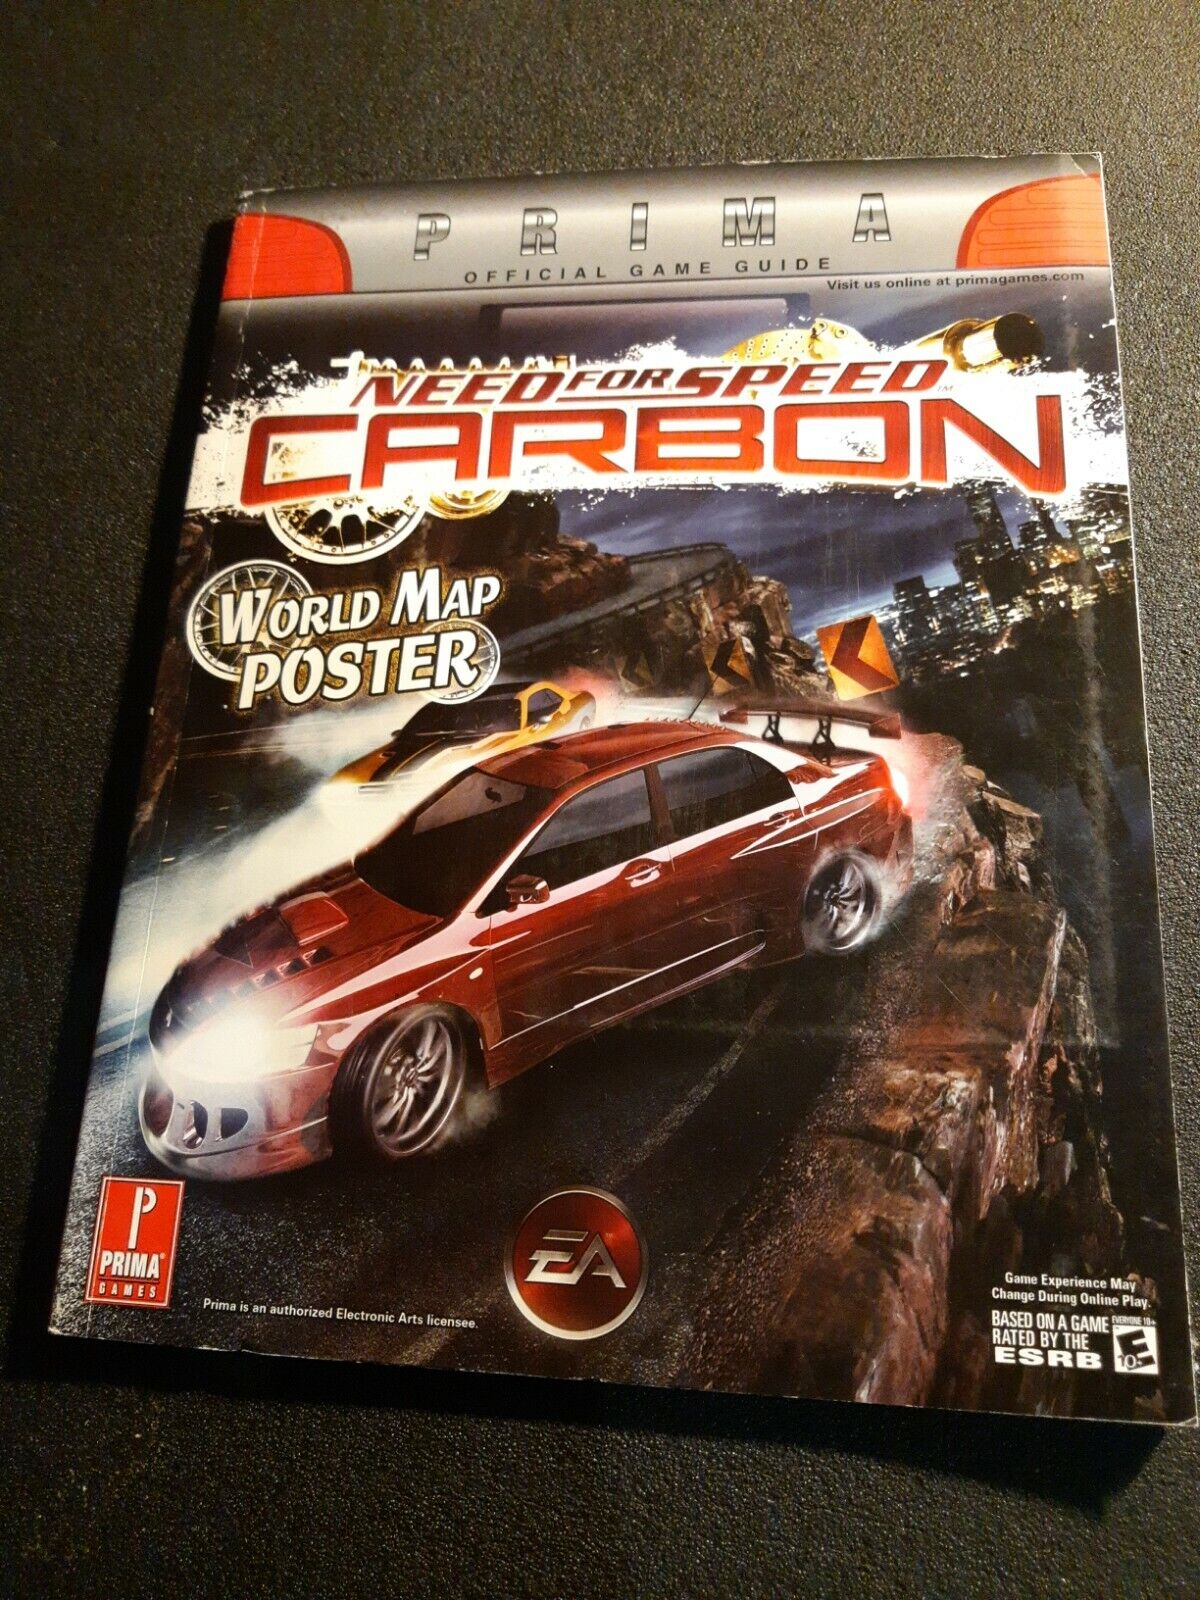 Need For Speed Carbon Guide Officiel PS3 GameCube PS2 Xbox Xbox 360 Wii Book Koopje, goedkoop